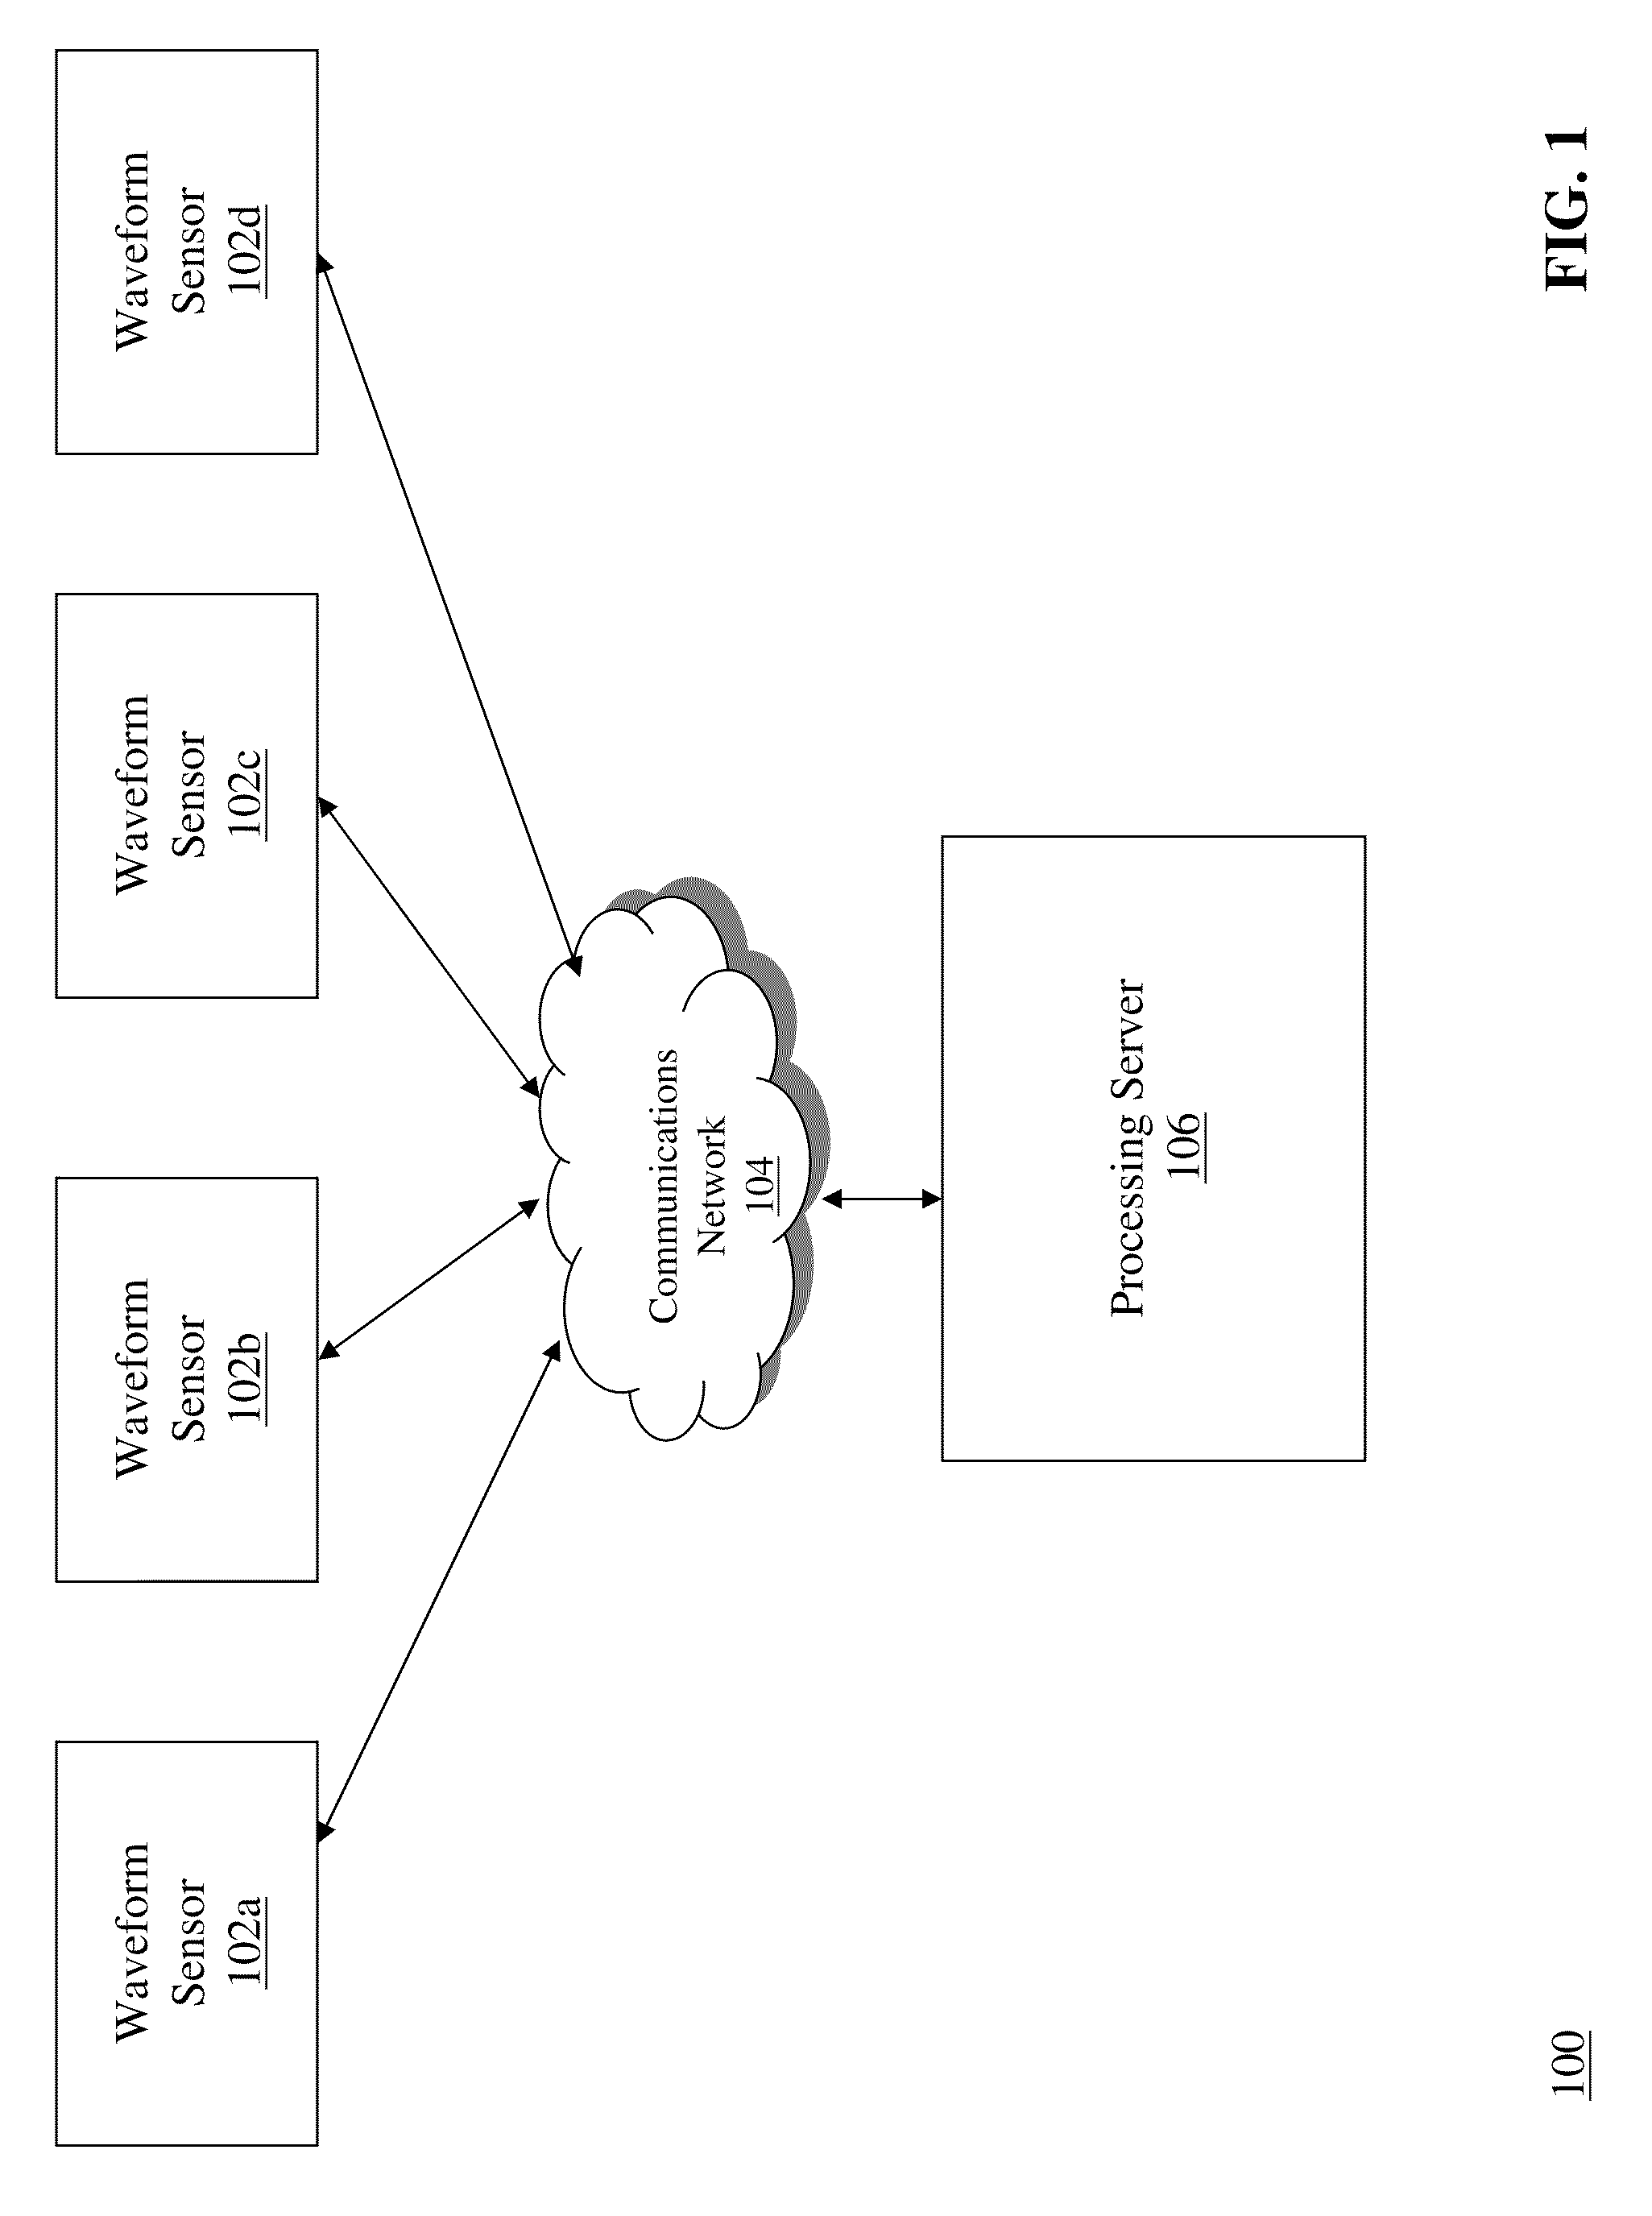 Method and apparatus for detecting lightning activity